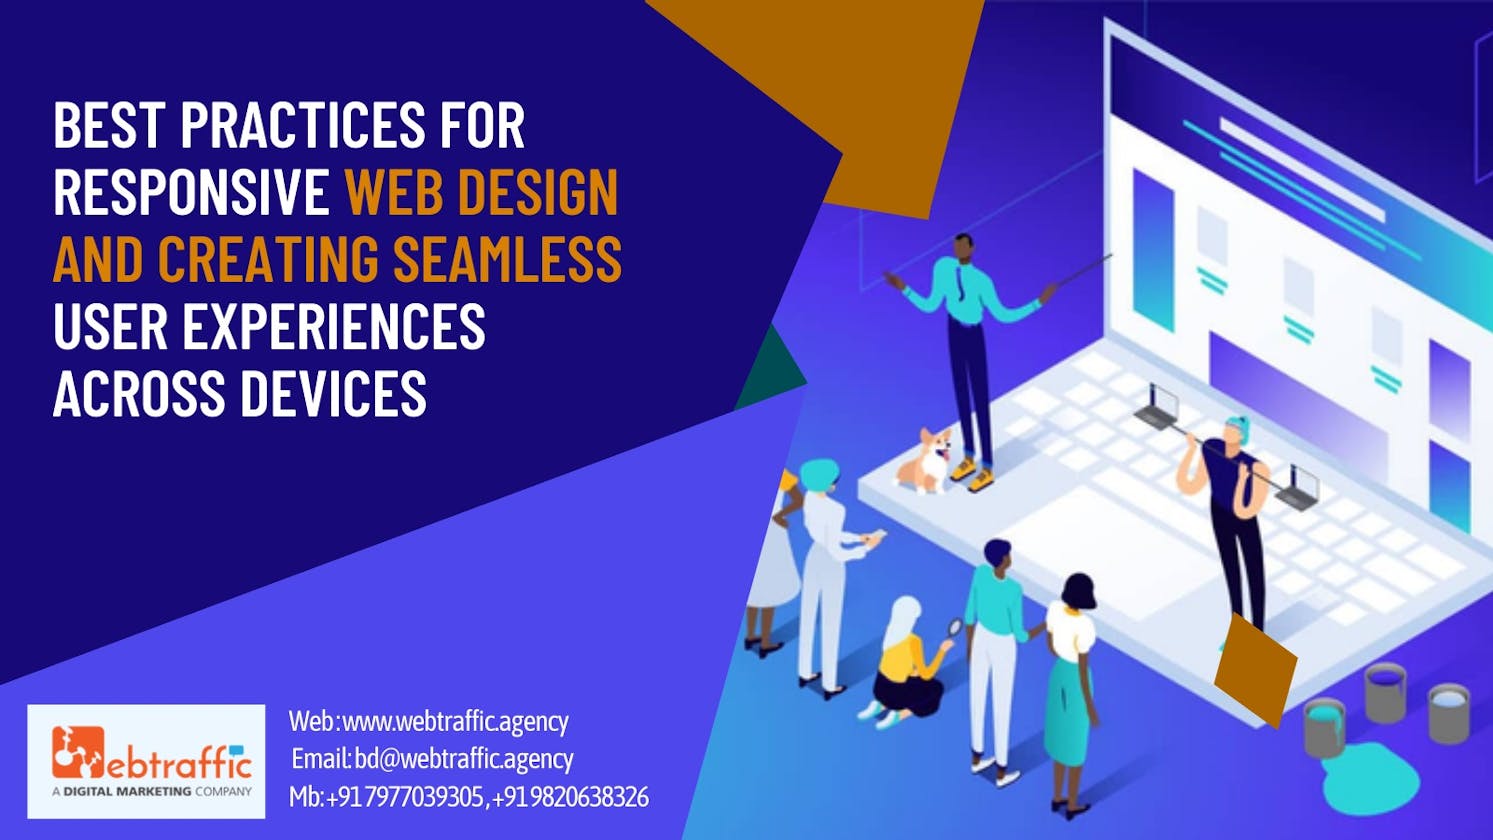 Best practices for responsive web design and creating seamless user experiences across devices